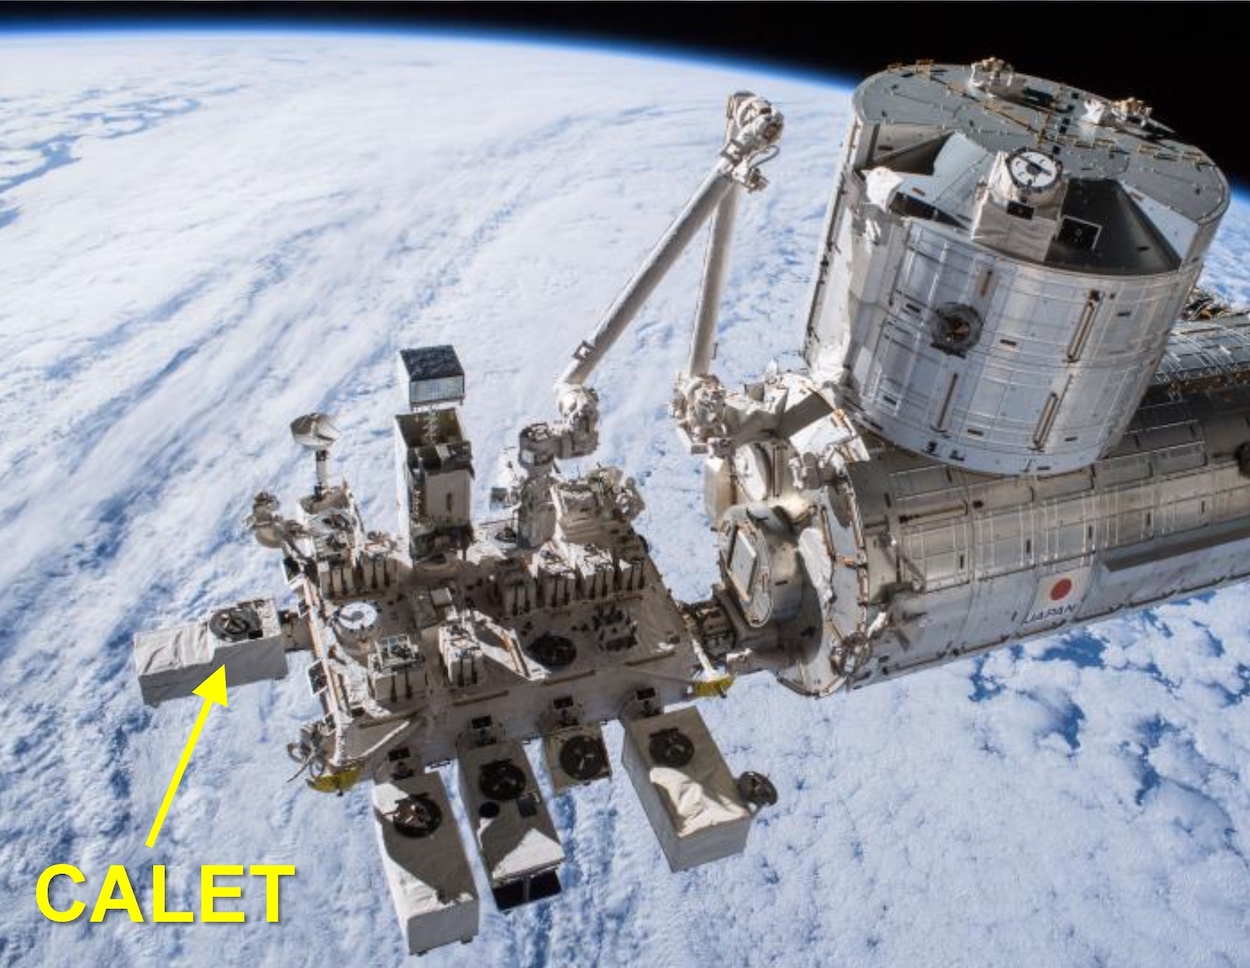 CALET experiment on the International Space Station